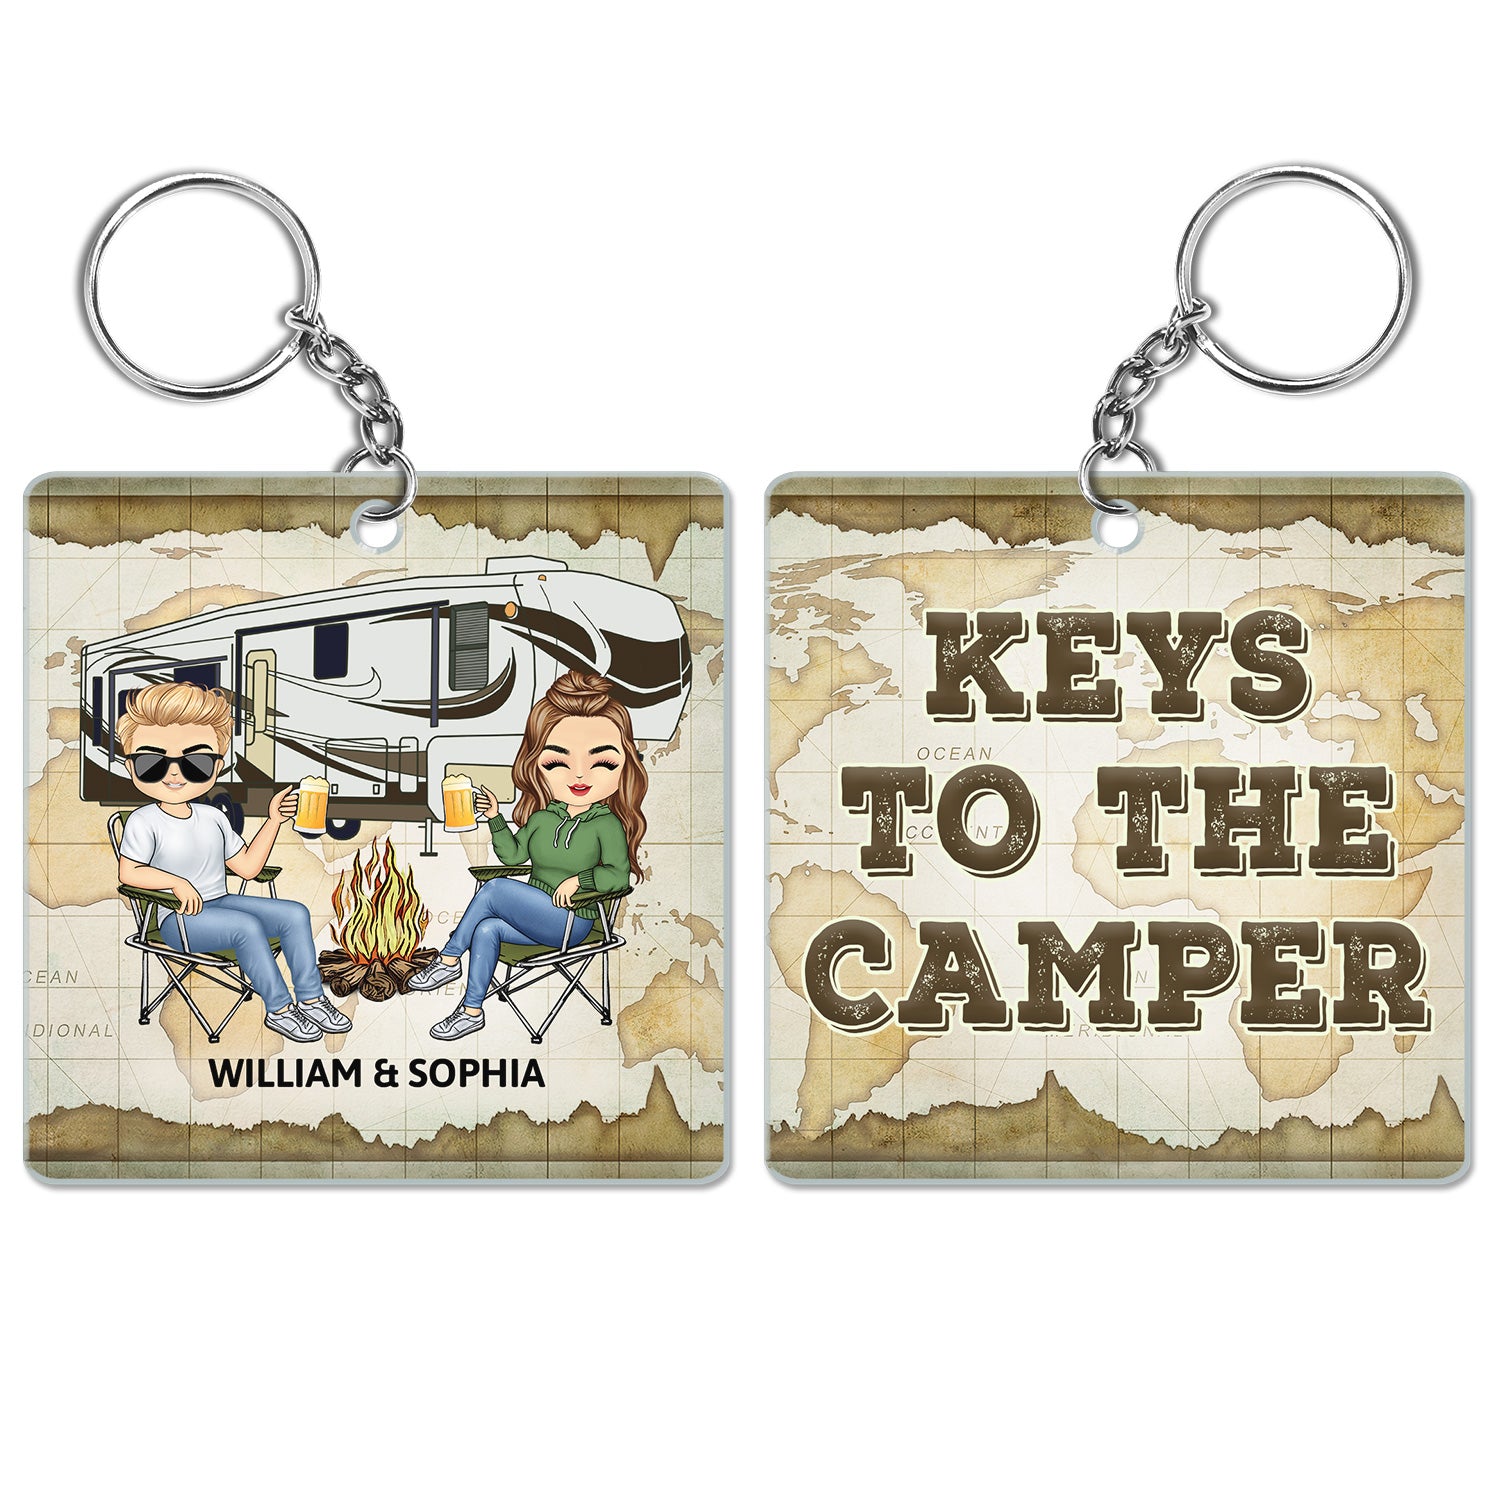 Keys To The Camper - Anniversary, Loving Gifts For Couples, Husband, Wife, Camping Lovers - Personalized Acrylic Keychain